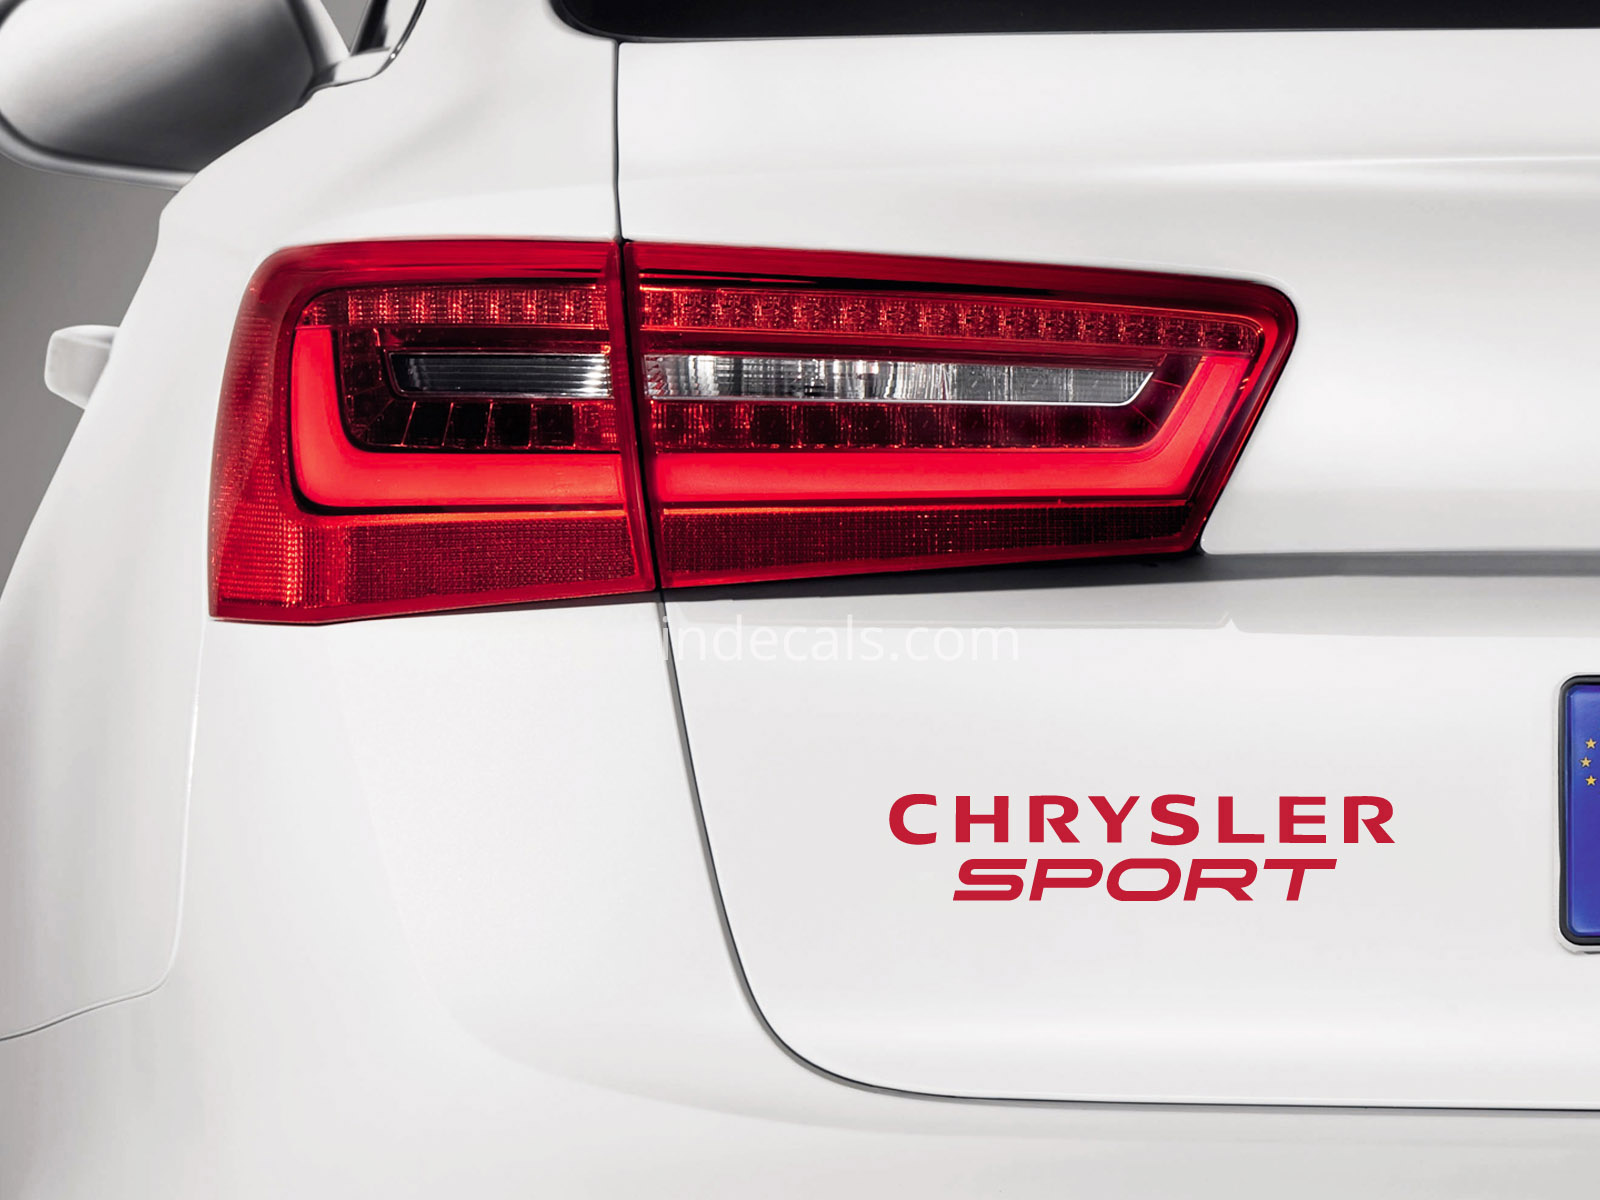 1 x Chrysler Sports Sticker for Trunk - Red